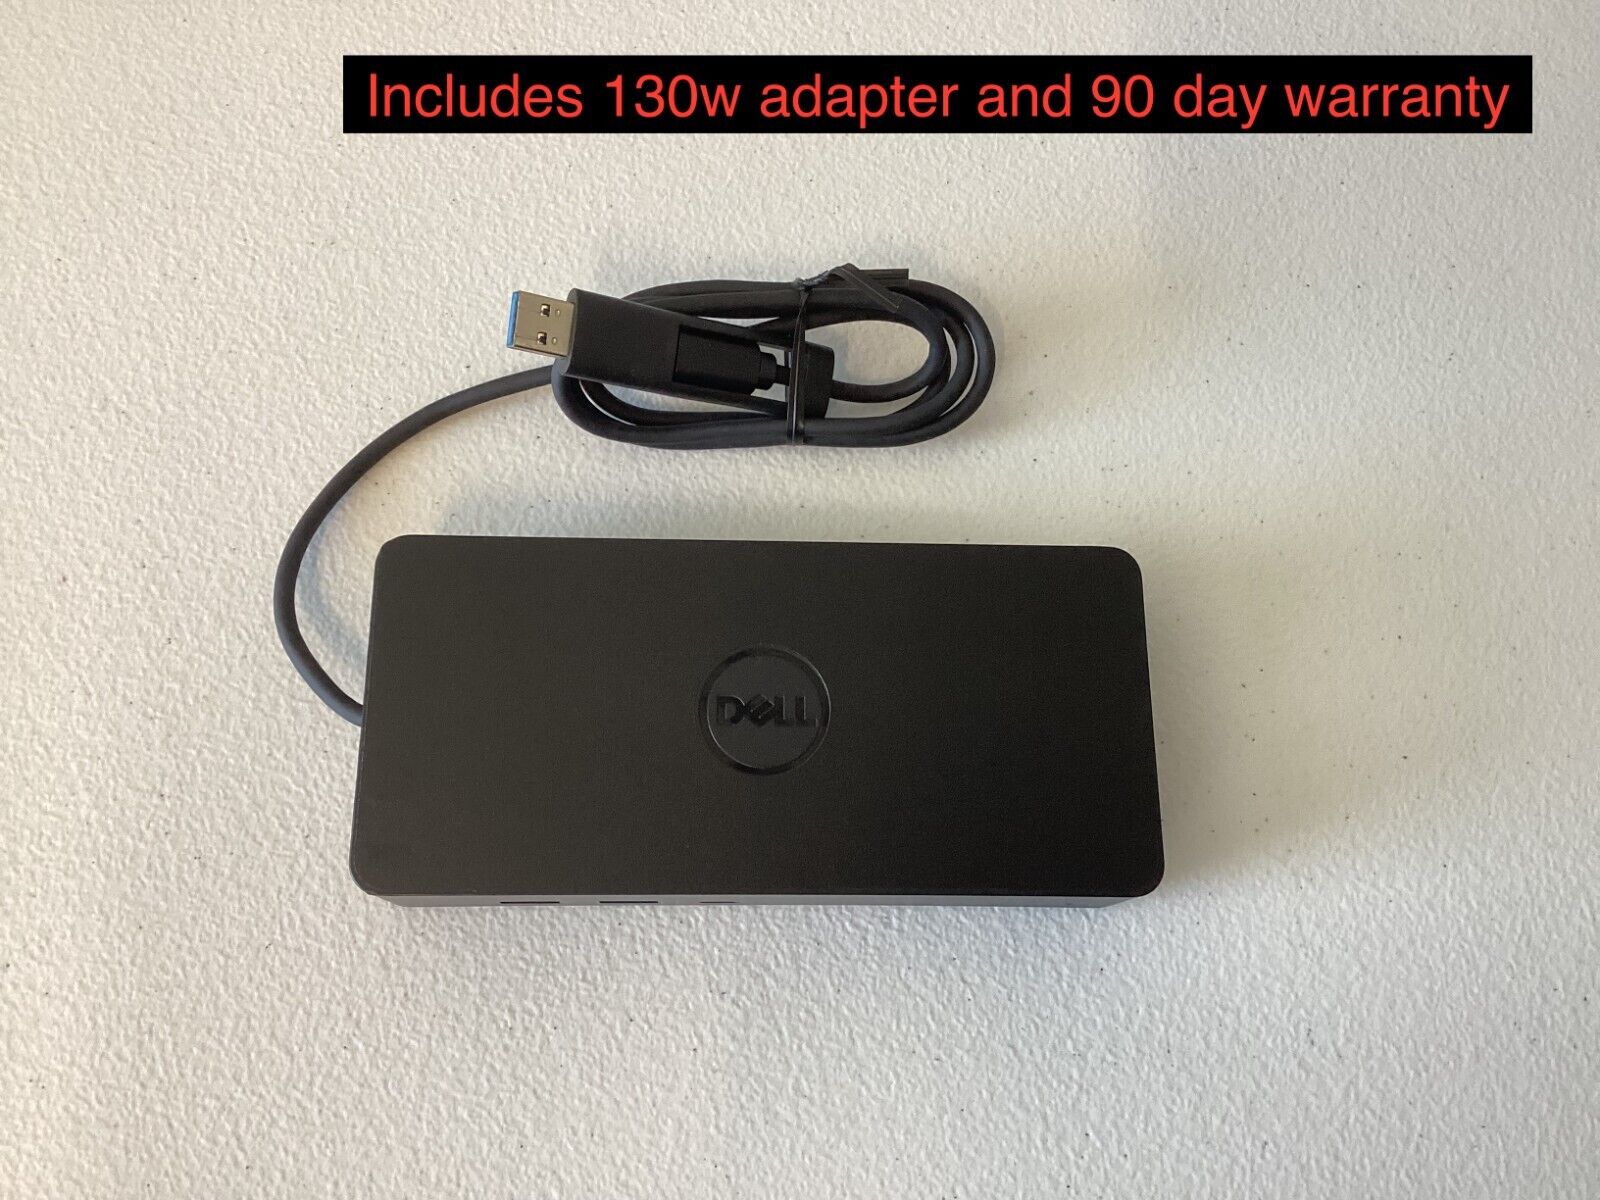 Dell D6000S Universal Docking Station USB-C 130w AC Adapter- 90 day warranty